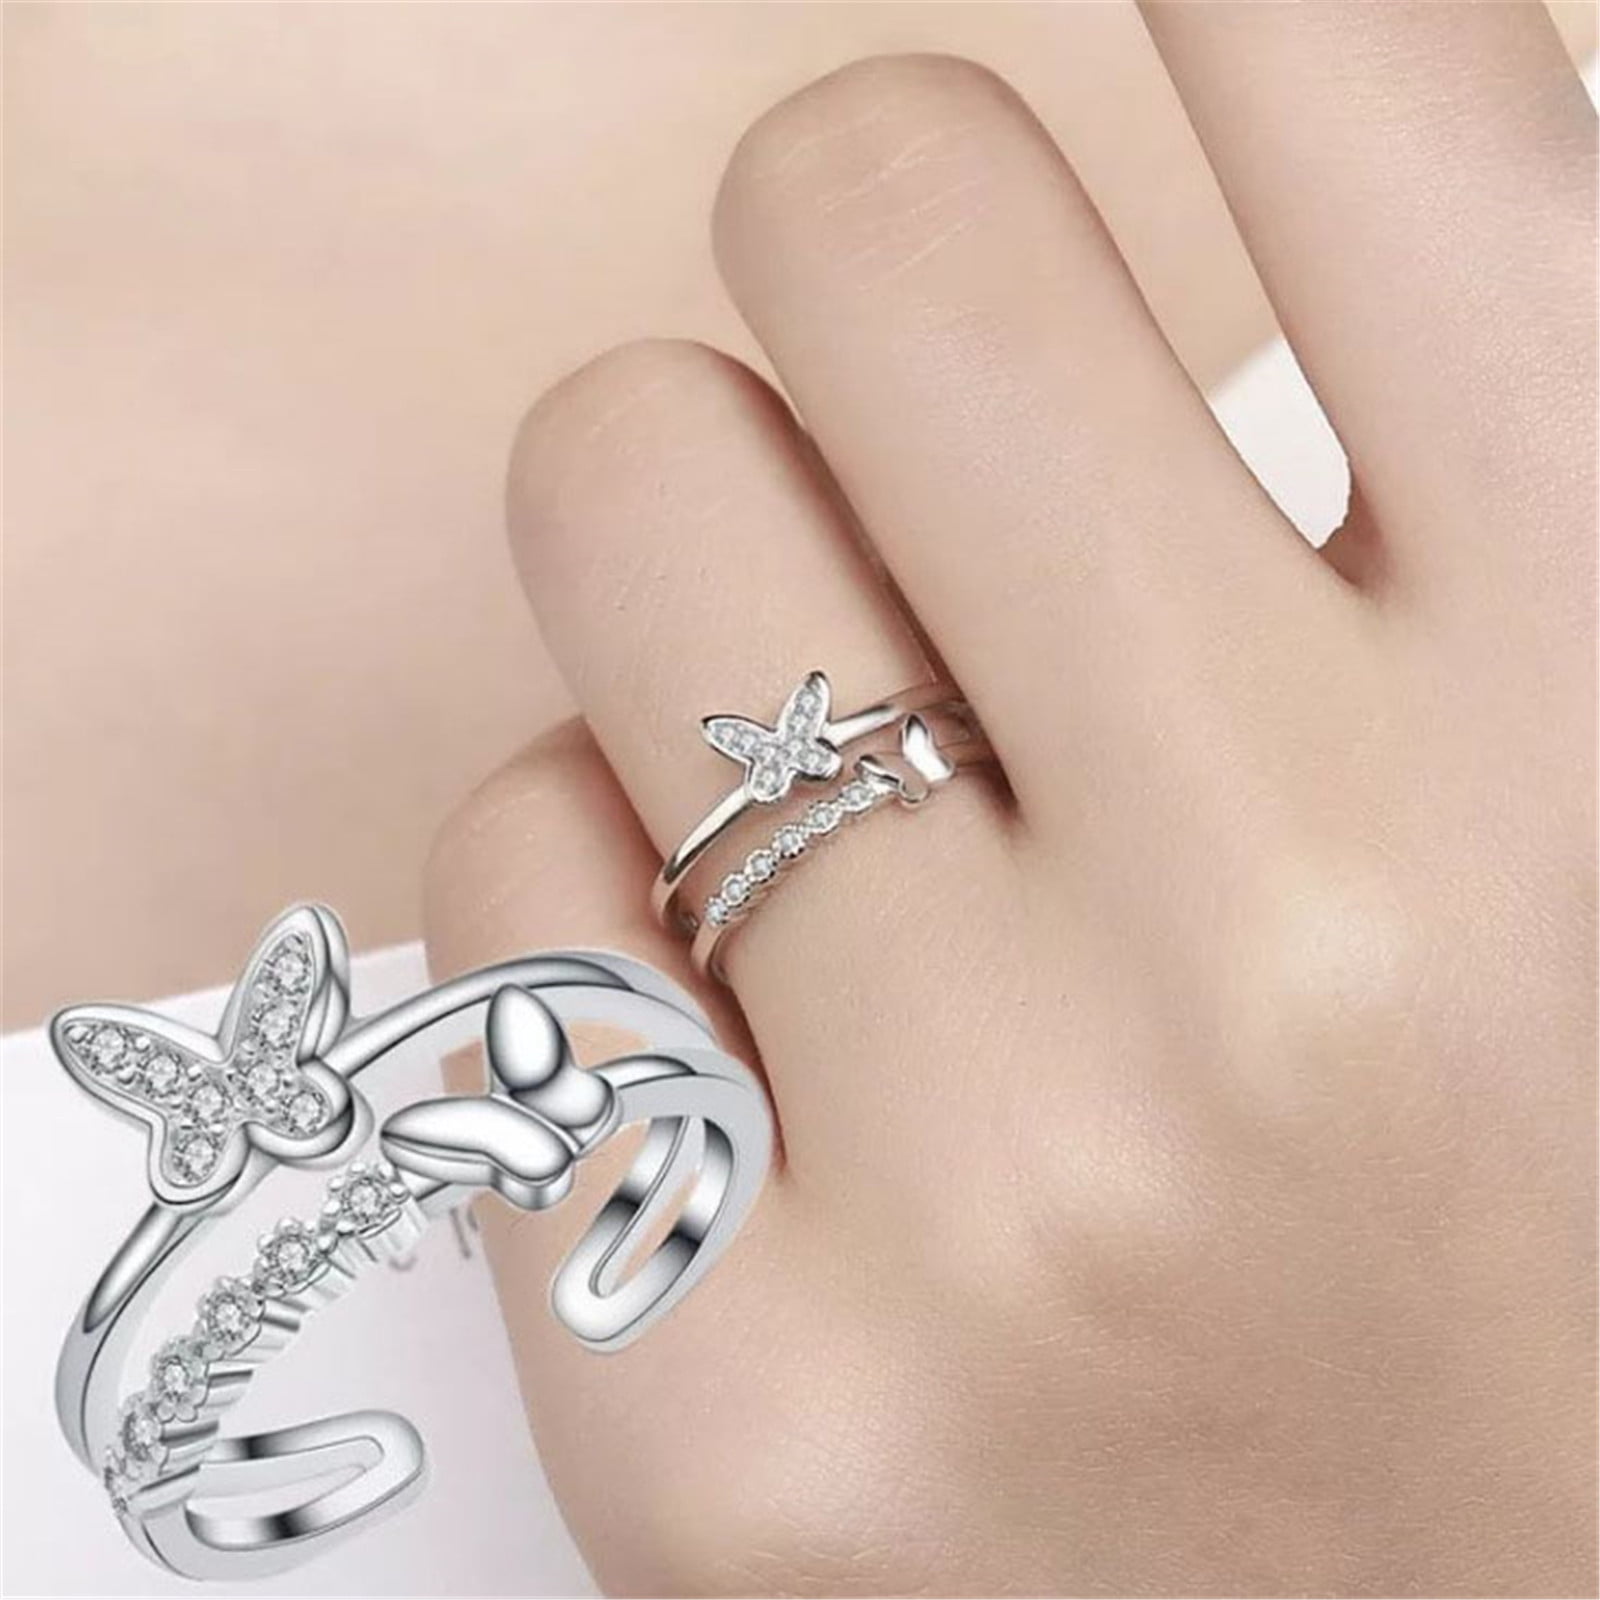 Multiple Boho Silver Ring Set Star Moon Wave Feather Rings Stackable  Knuckle Rings for Women Bohemian Midi Finger Rings Set for Teens Girls -  Walmart.com